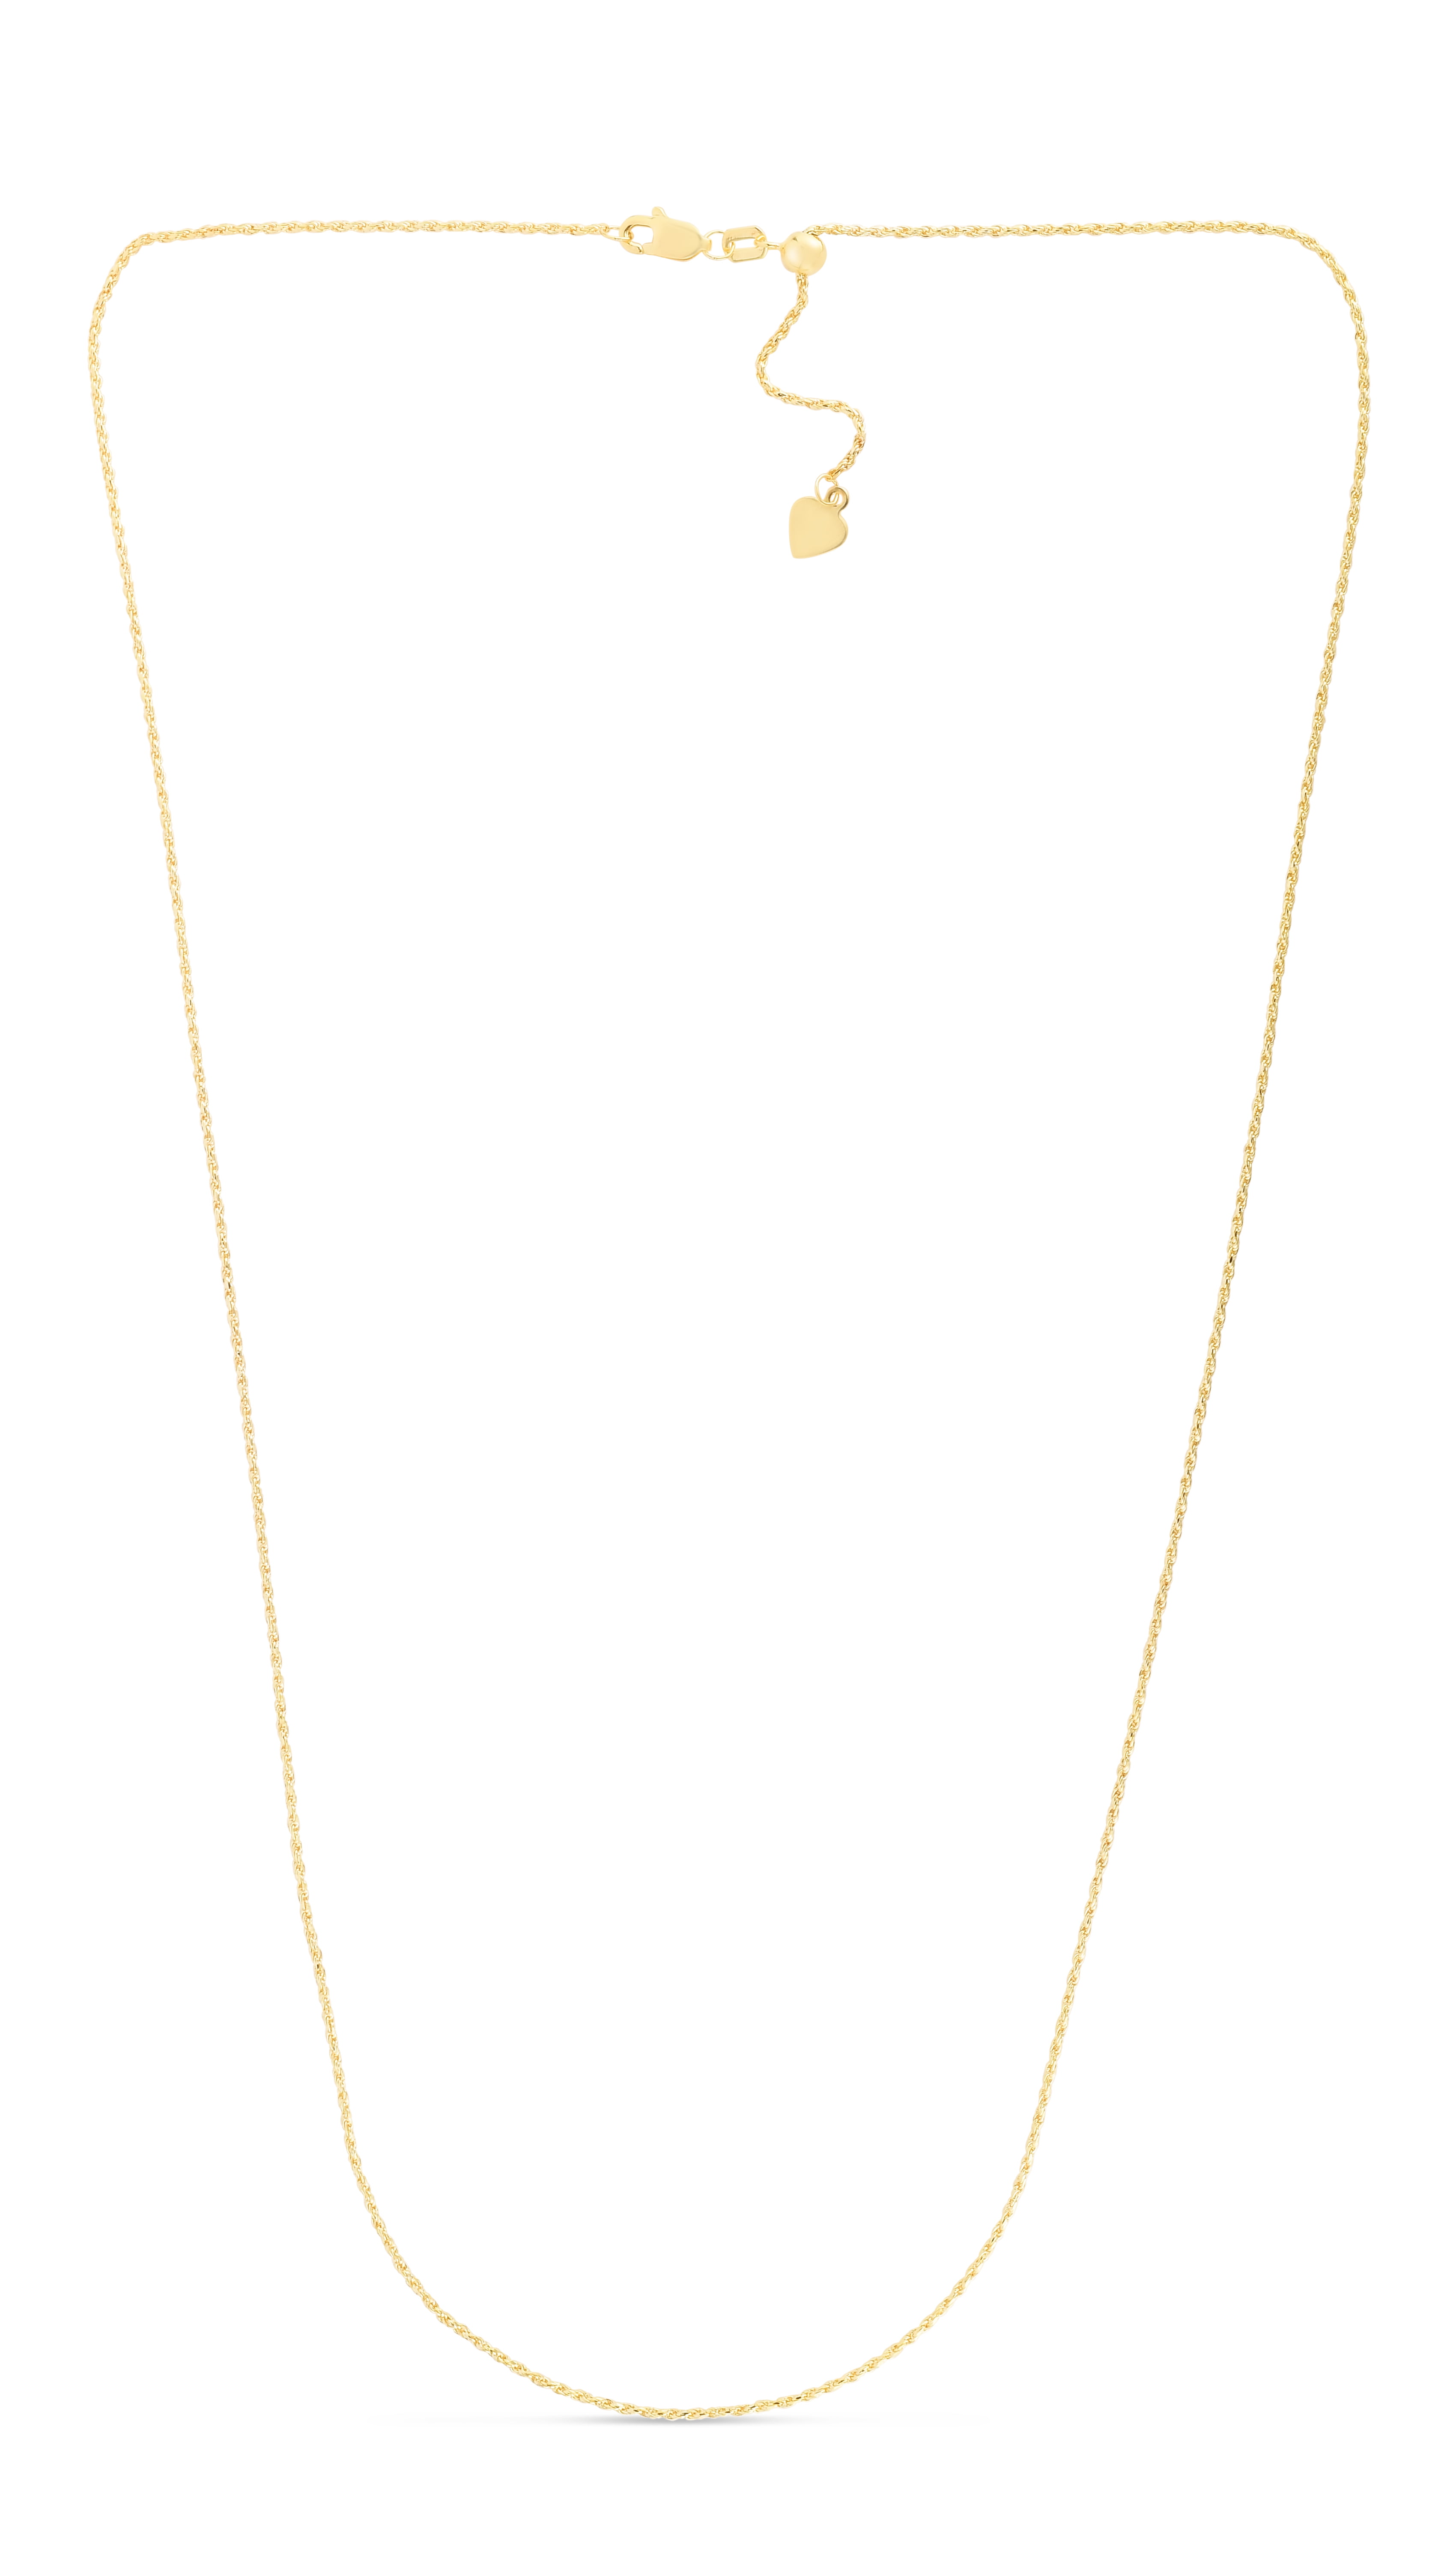 14K Yellow Gold #1 Honey Pendant on an Adjustable 14K Yellow Gold Chain Necklace 